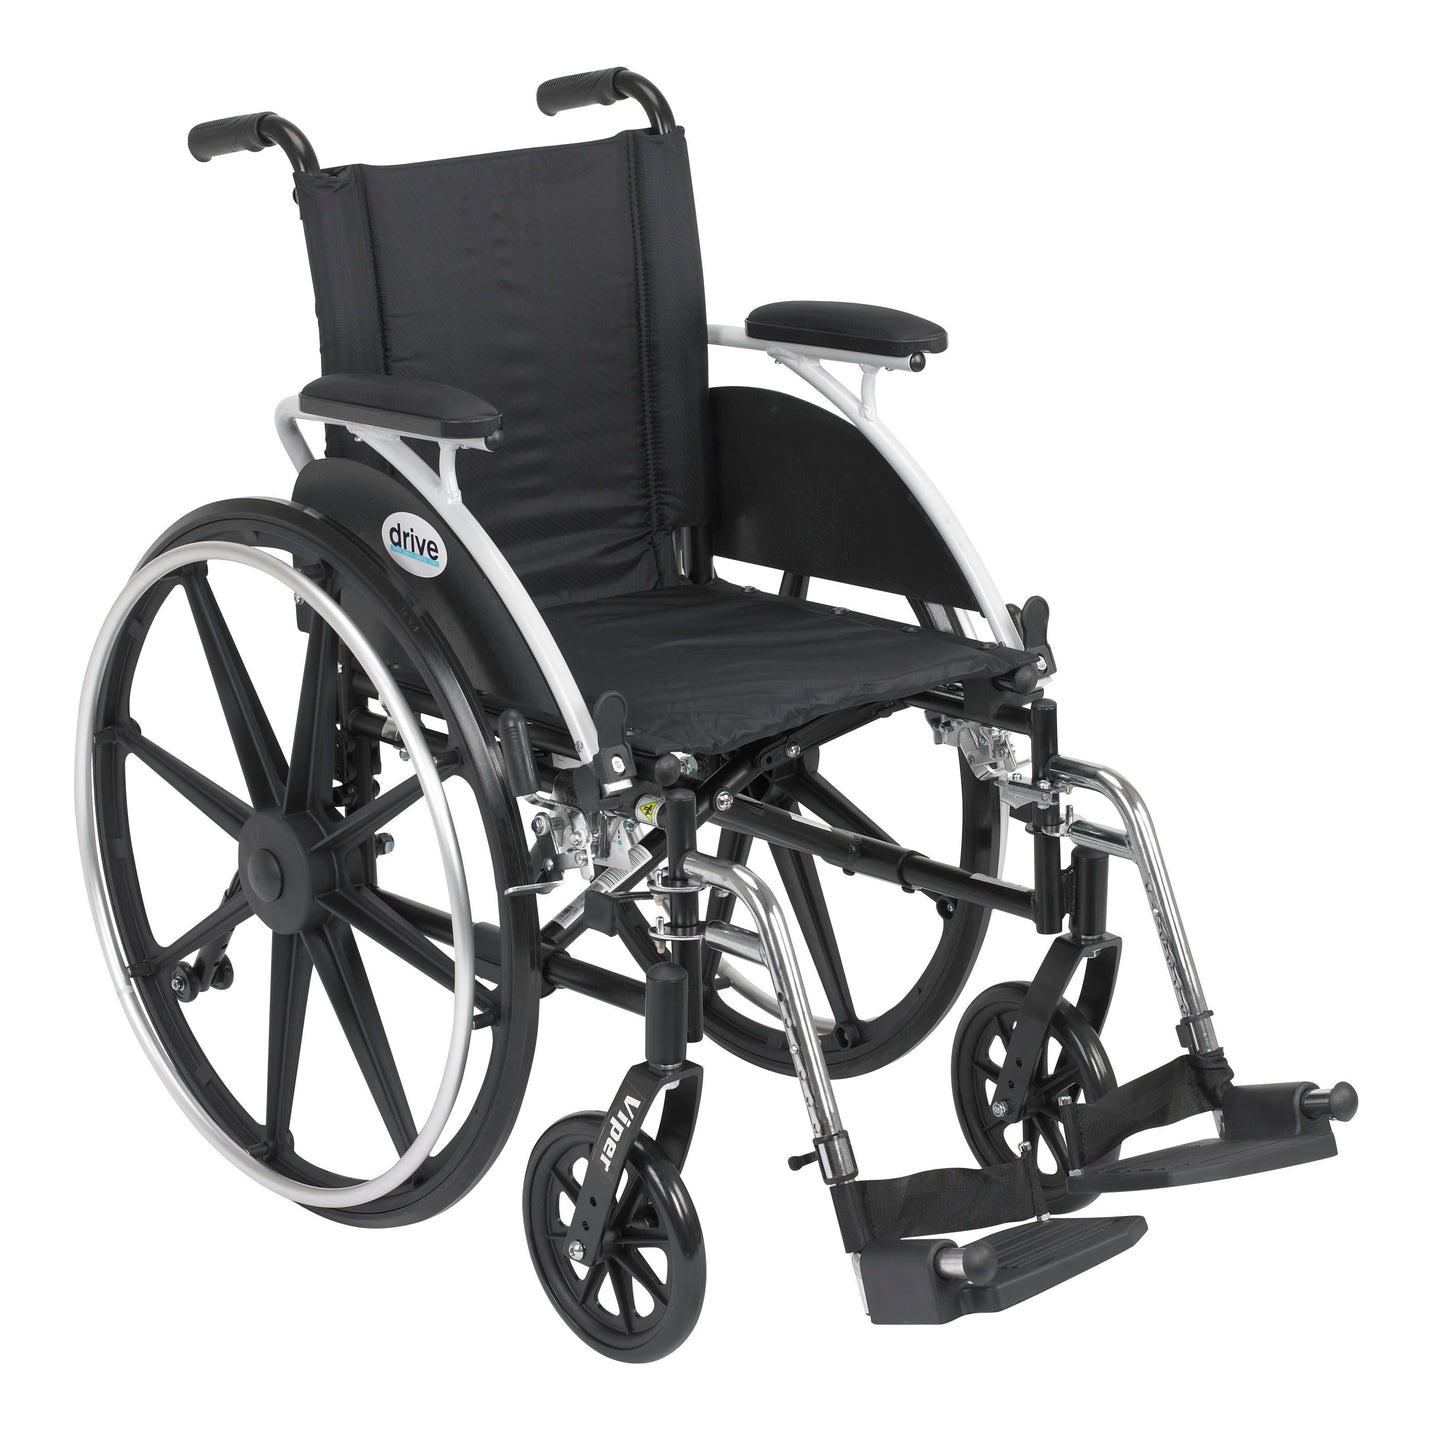 Viper Wheelchair with Flip Back Removable Arms, Desk Arms, Swing away Footrests, 12" Seat